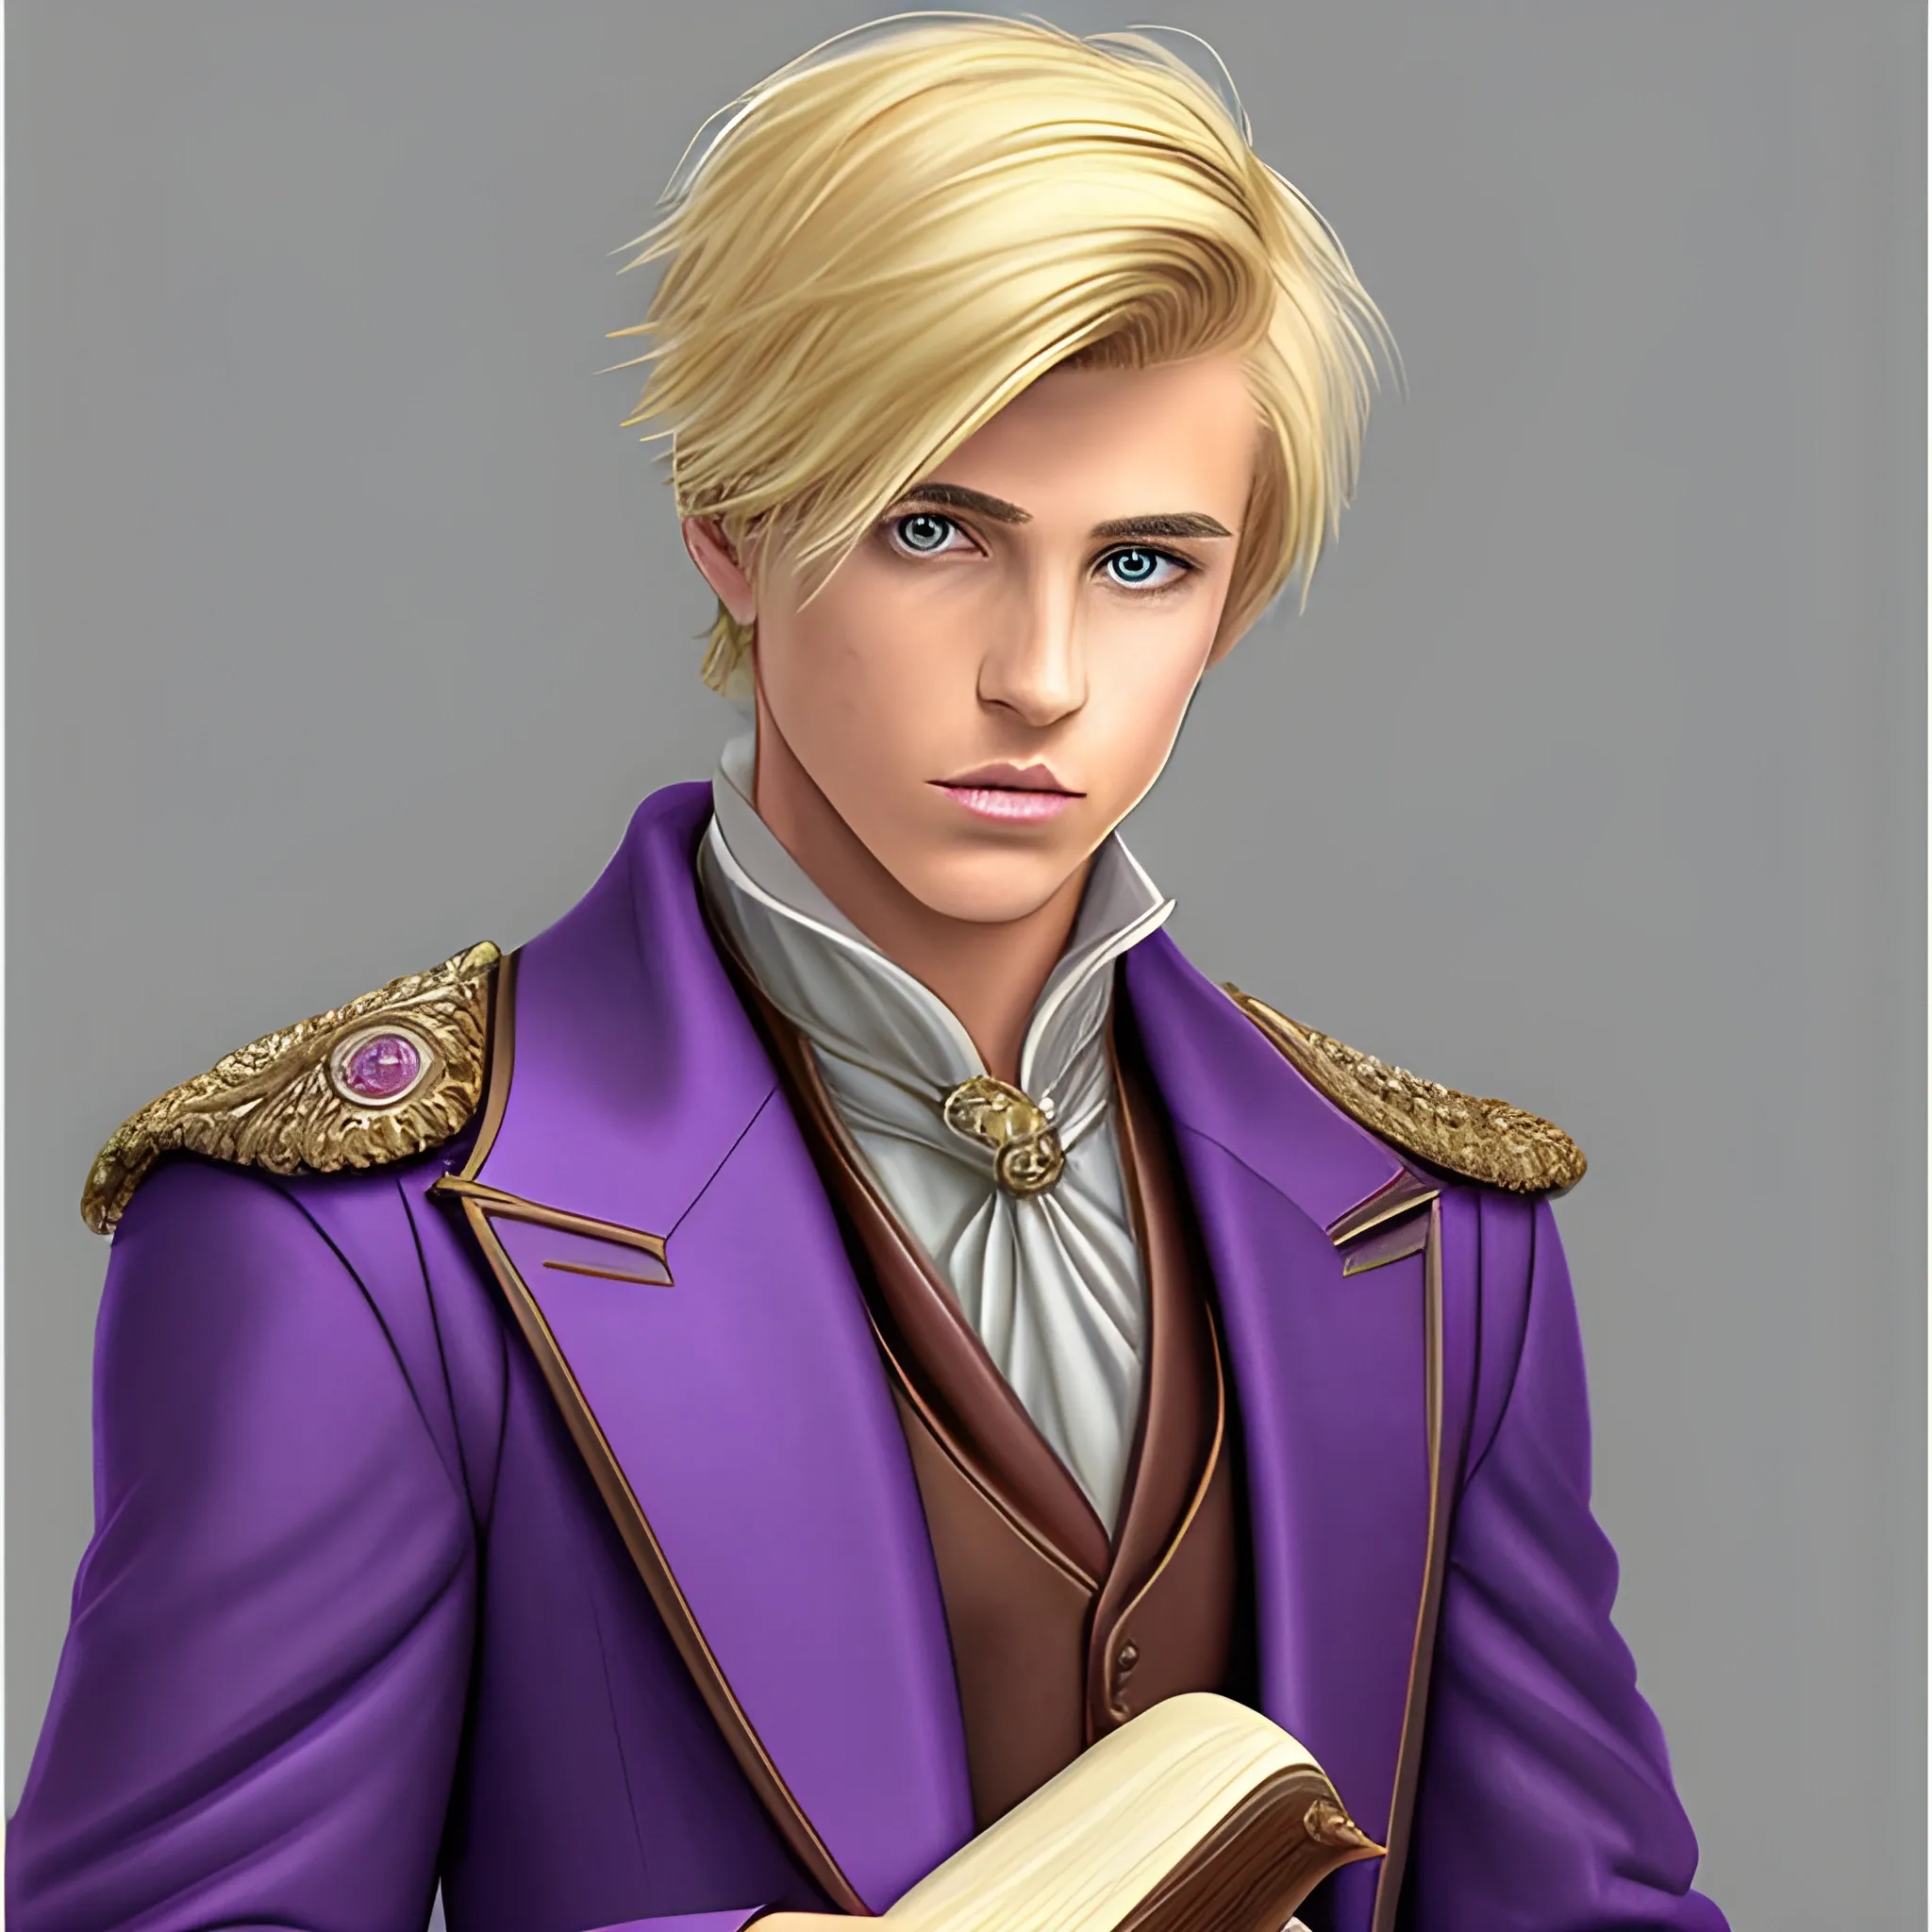 Short male with blond hair styled with a middle part, tanned skin. He is looking at the camera wearing a purple tailored suit. The suit has a white cloak which goes down to the back of his knees. The suit and cloak have markings and etchings in them, he is holding a leather bound book and pen.
Fantasy realism style